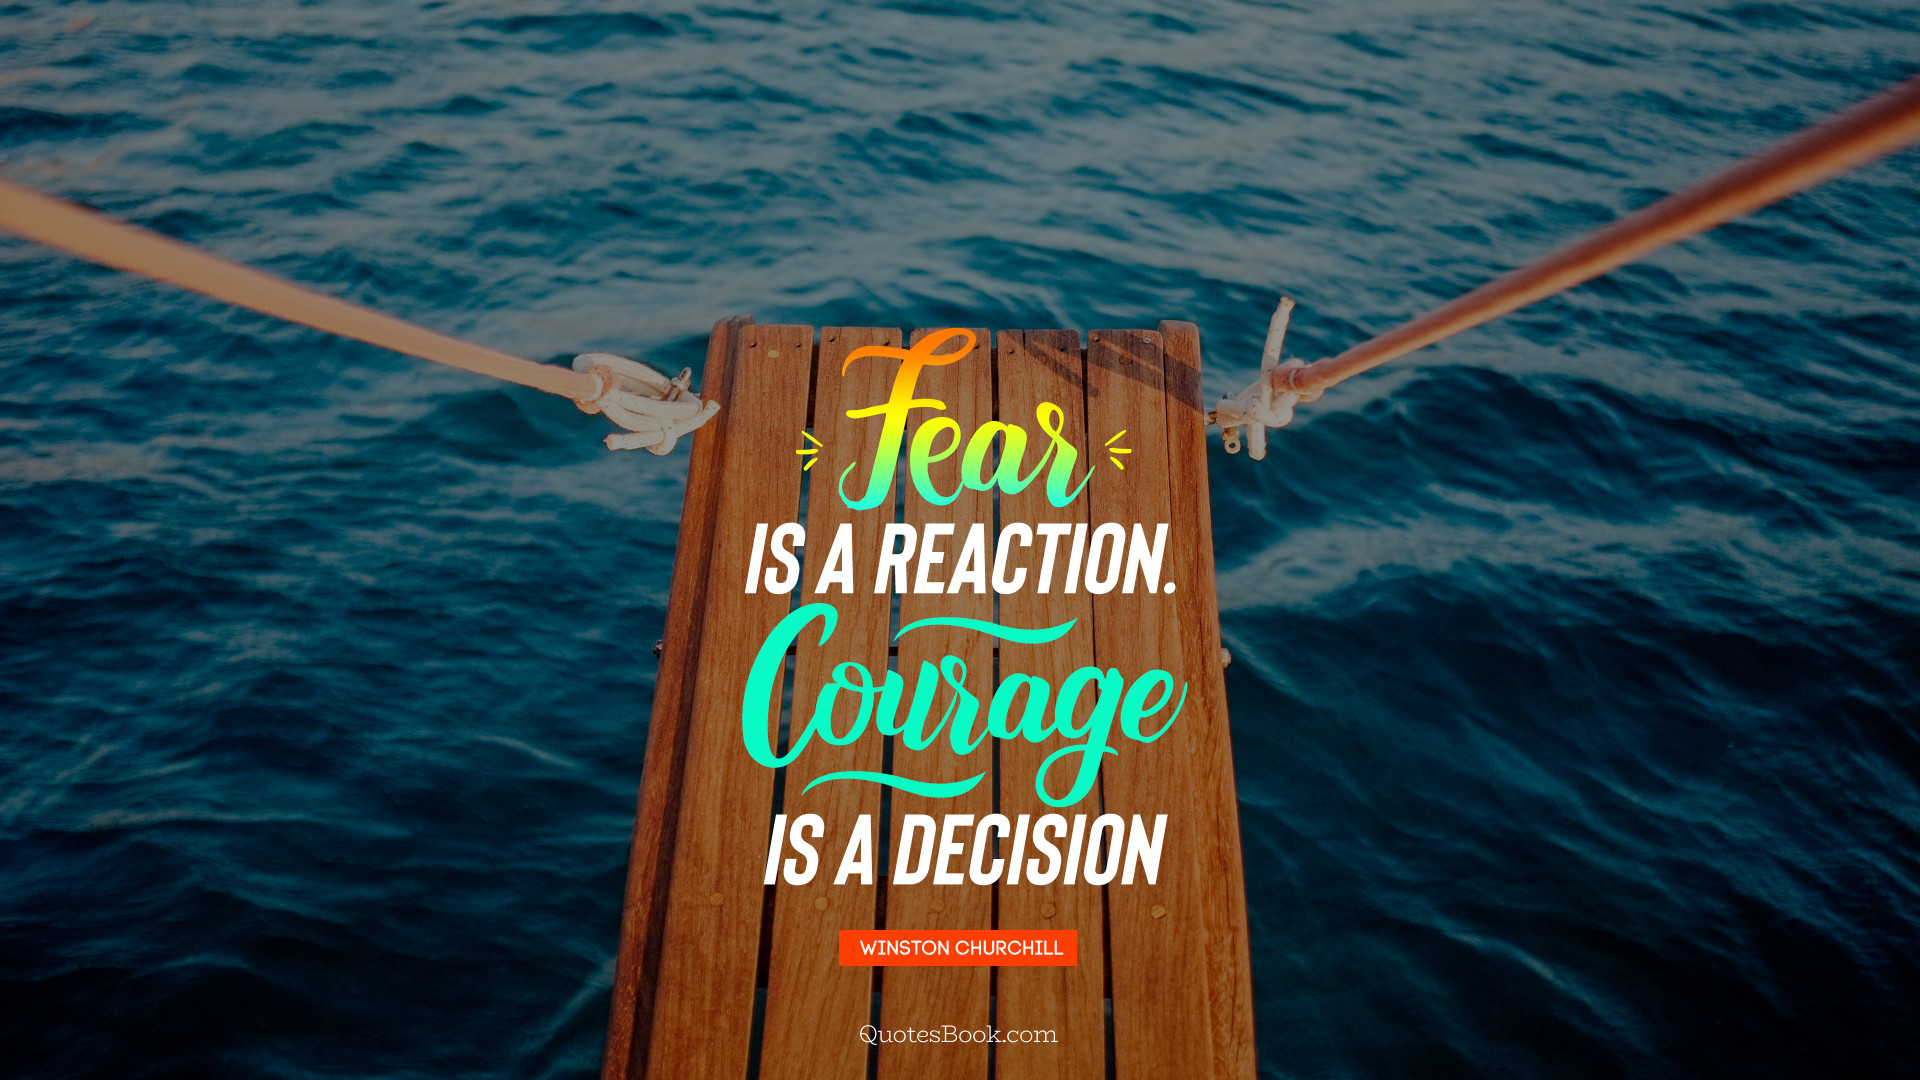 fear is a reaction courage is a decision 1920x1080 2311